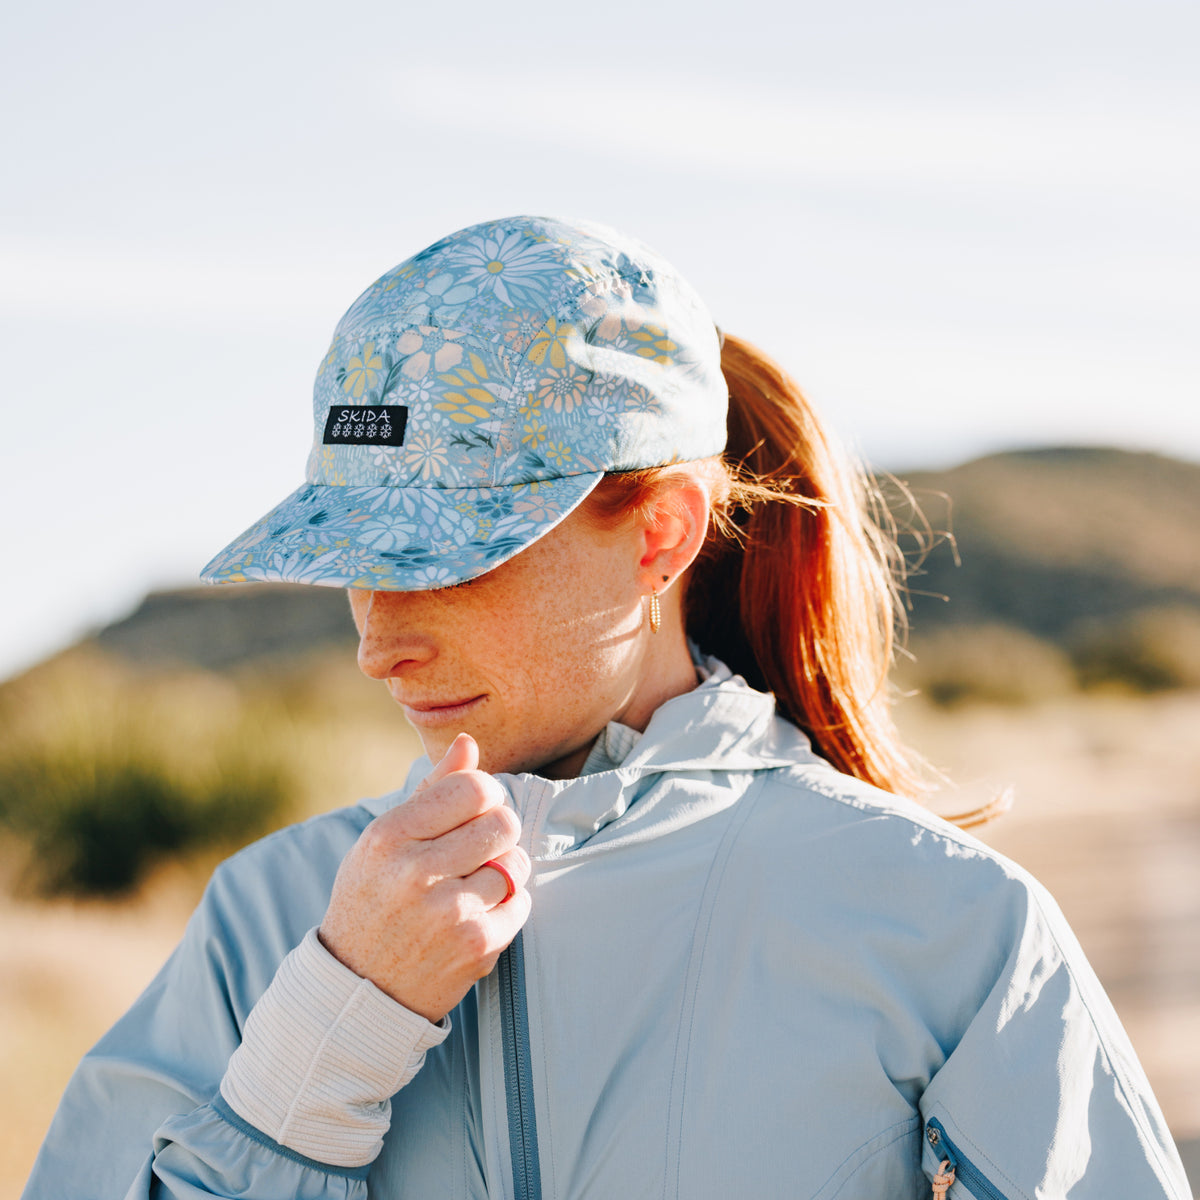 Shop Our Aloha Apparel Women's - Hats, Visors, Shirts and More